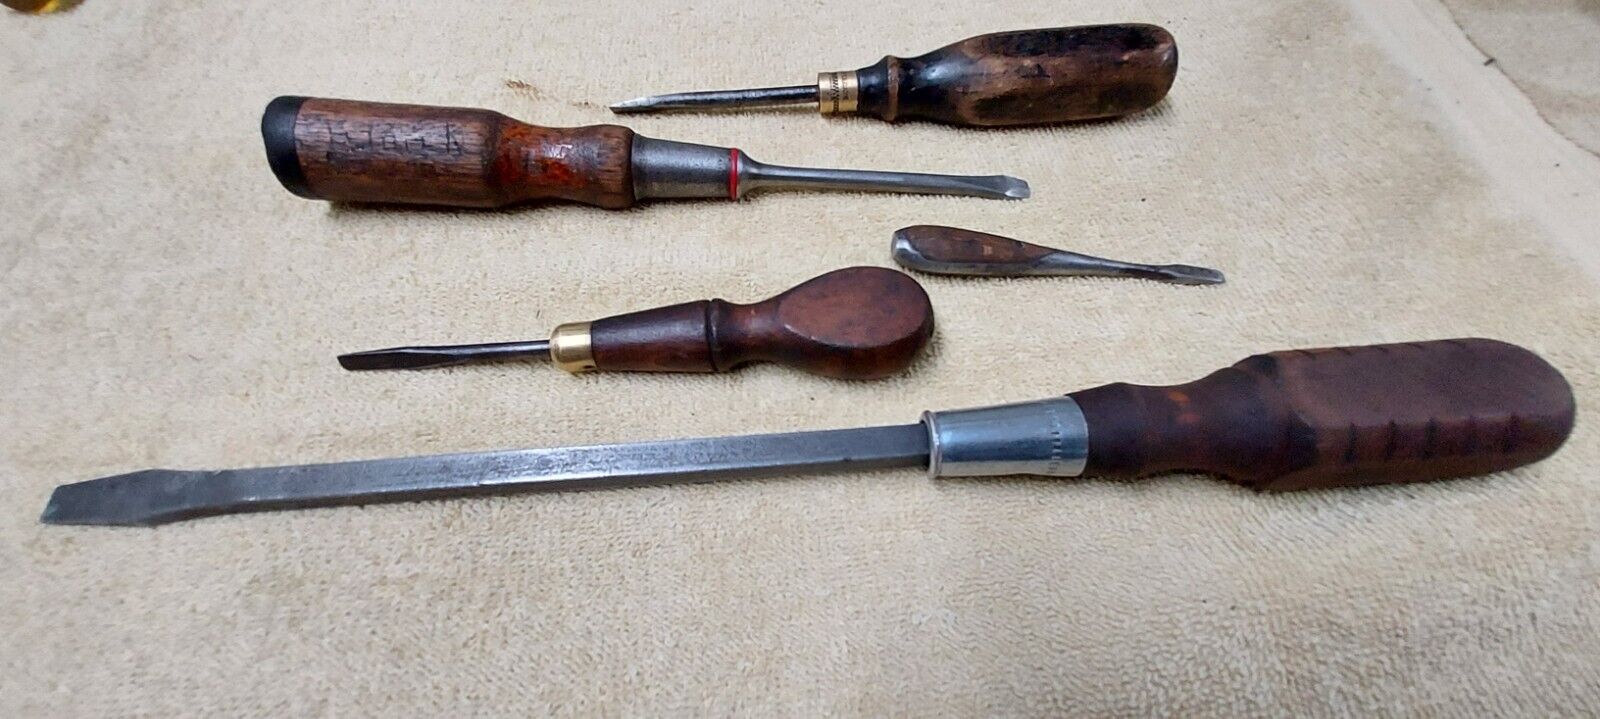 Old lot of 5, wood wood handle screwdrivers, 100 plus Stanley, Germany, Mass.